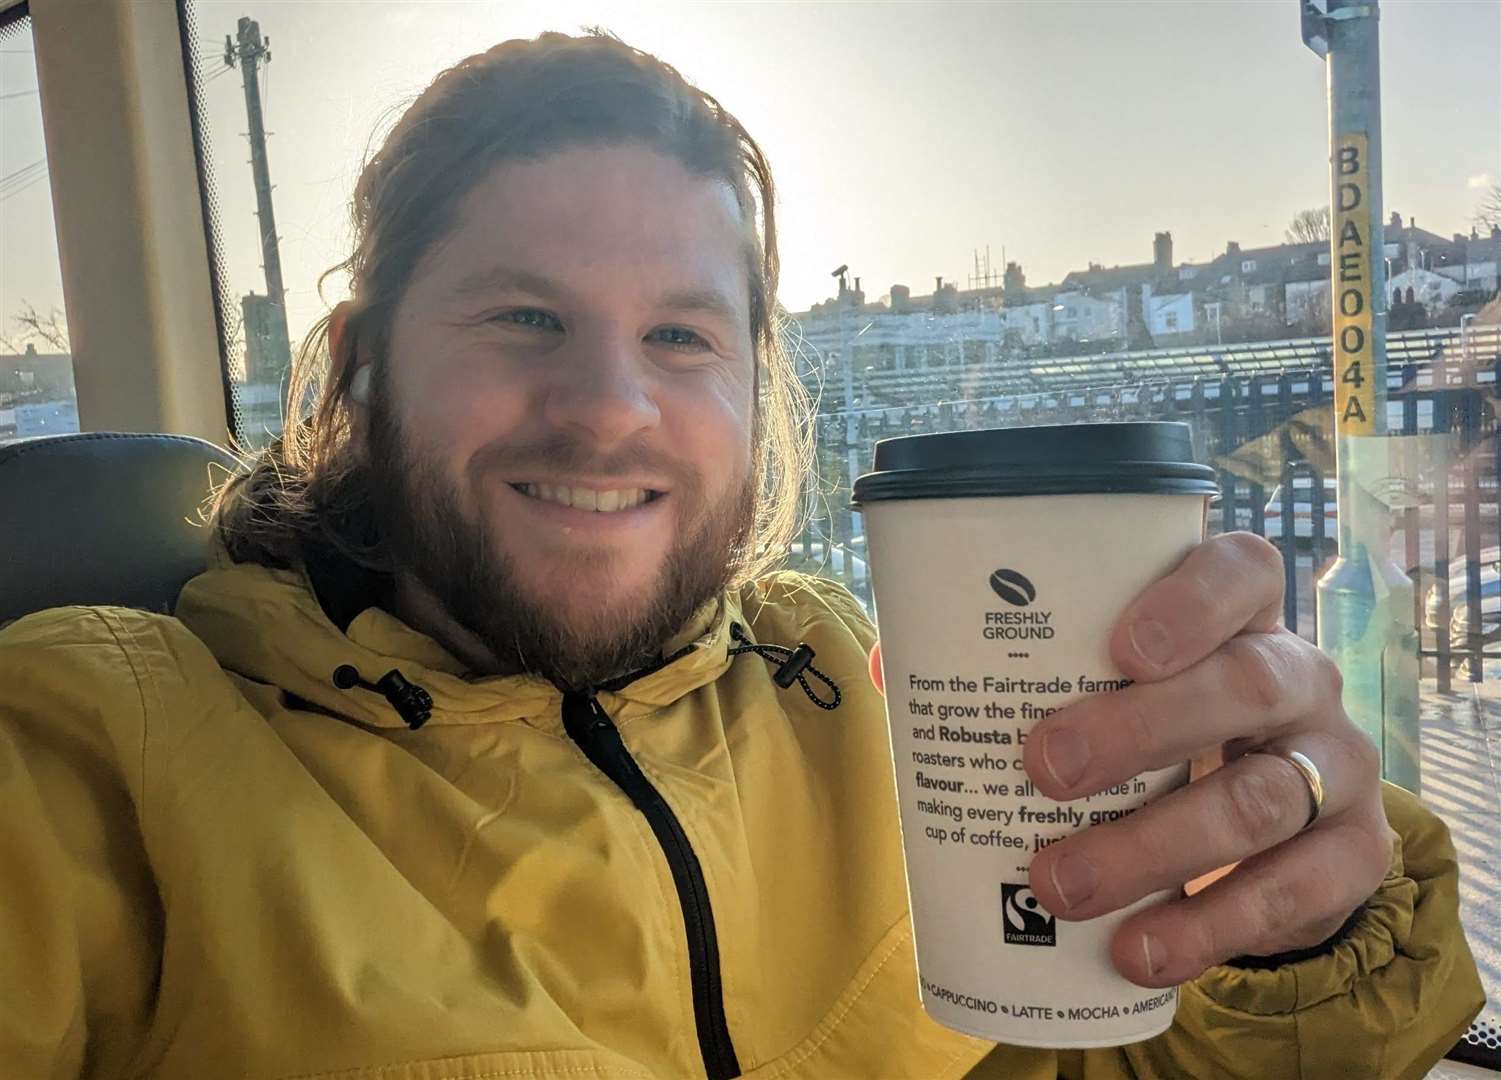 There was just enough time for our man to grab coffee to go in Gravesend